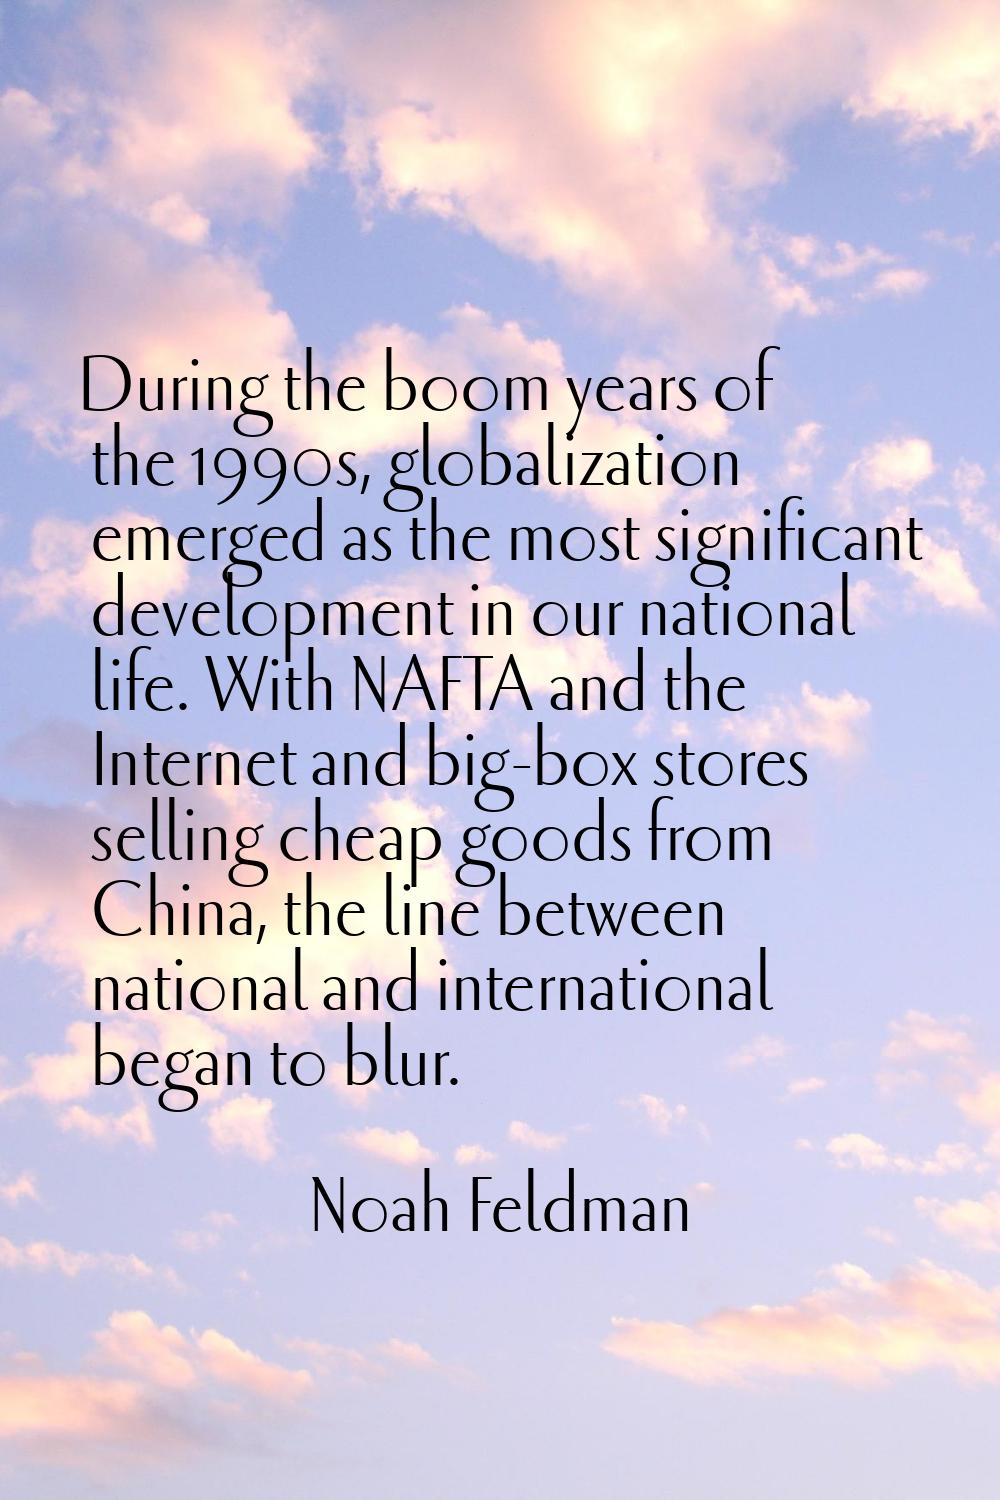 During the boom years of the 1990s, globalization emerged as the most significant development in ou